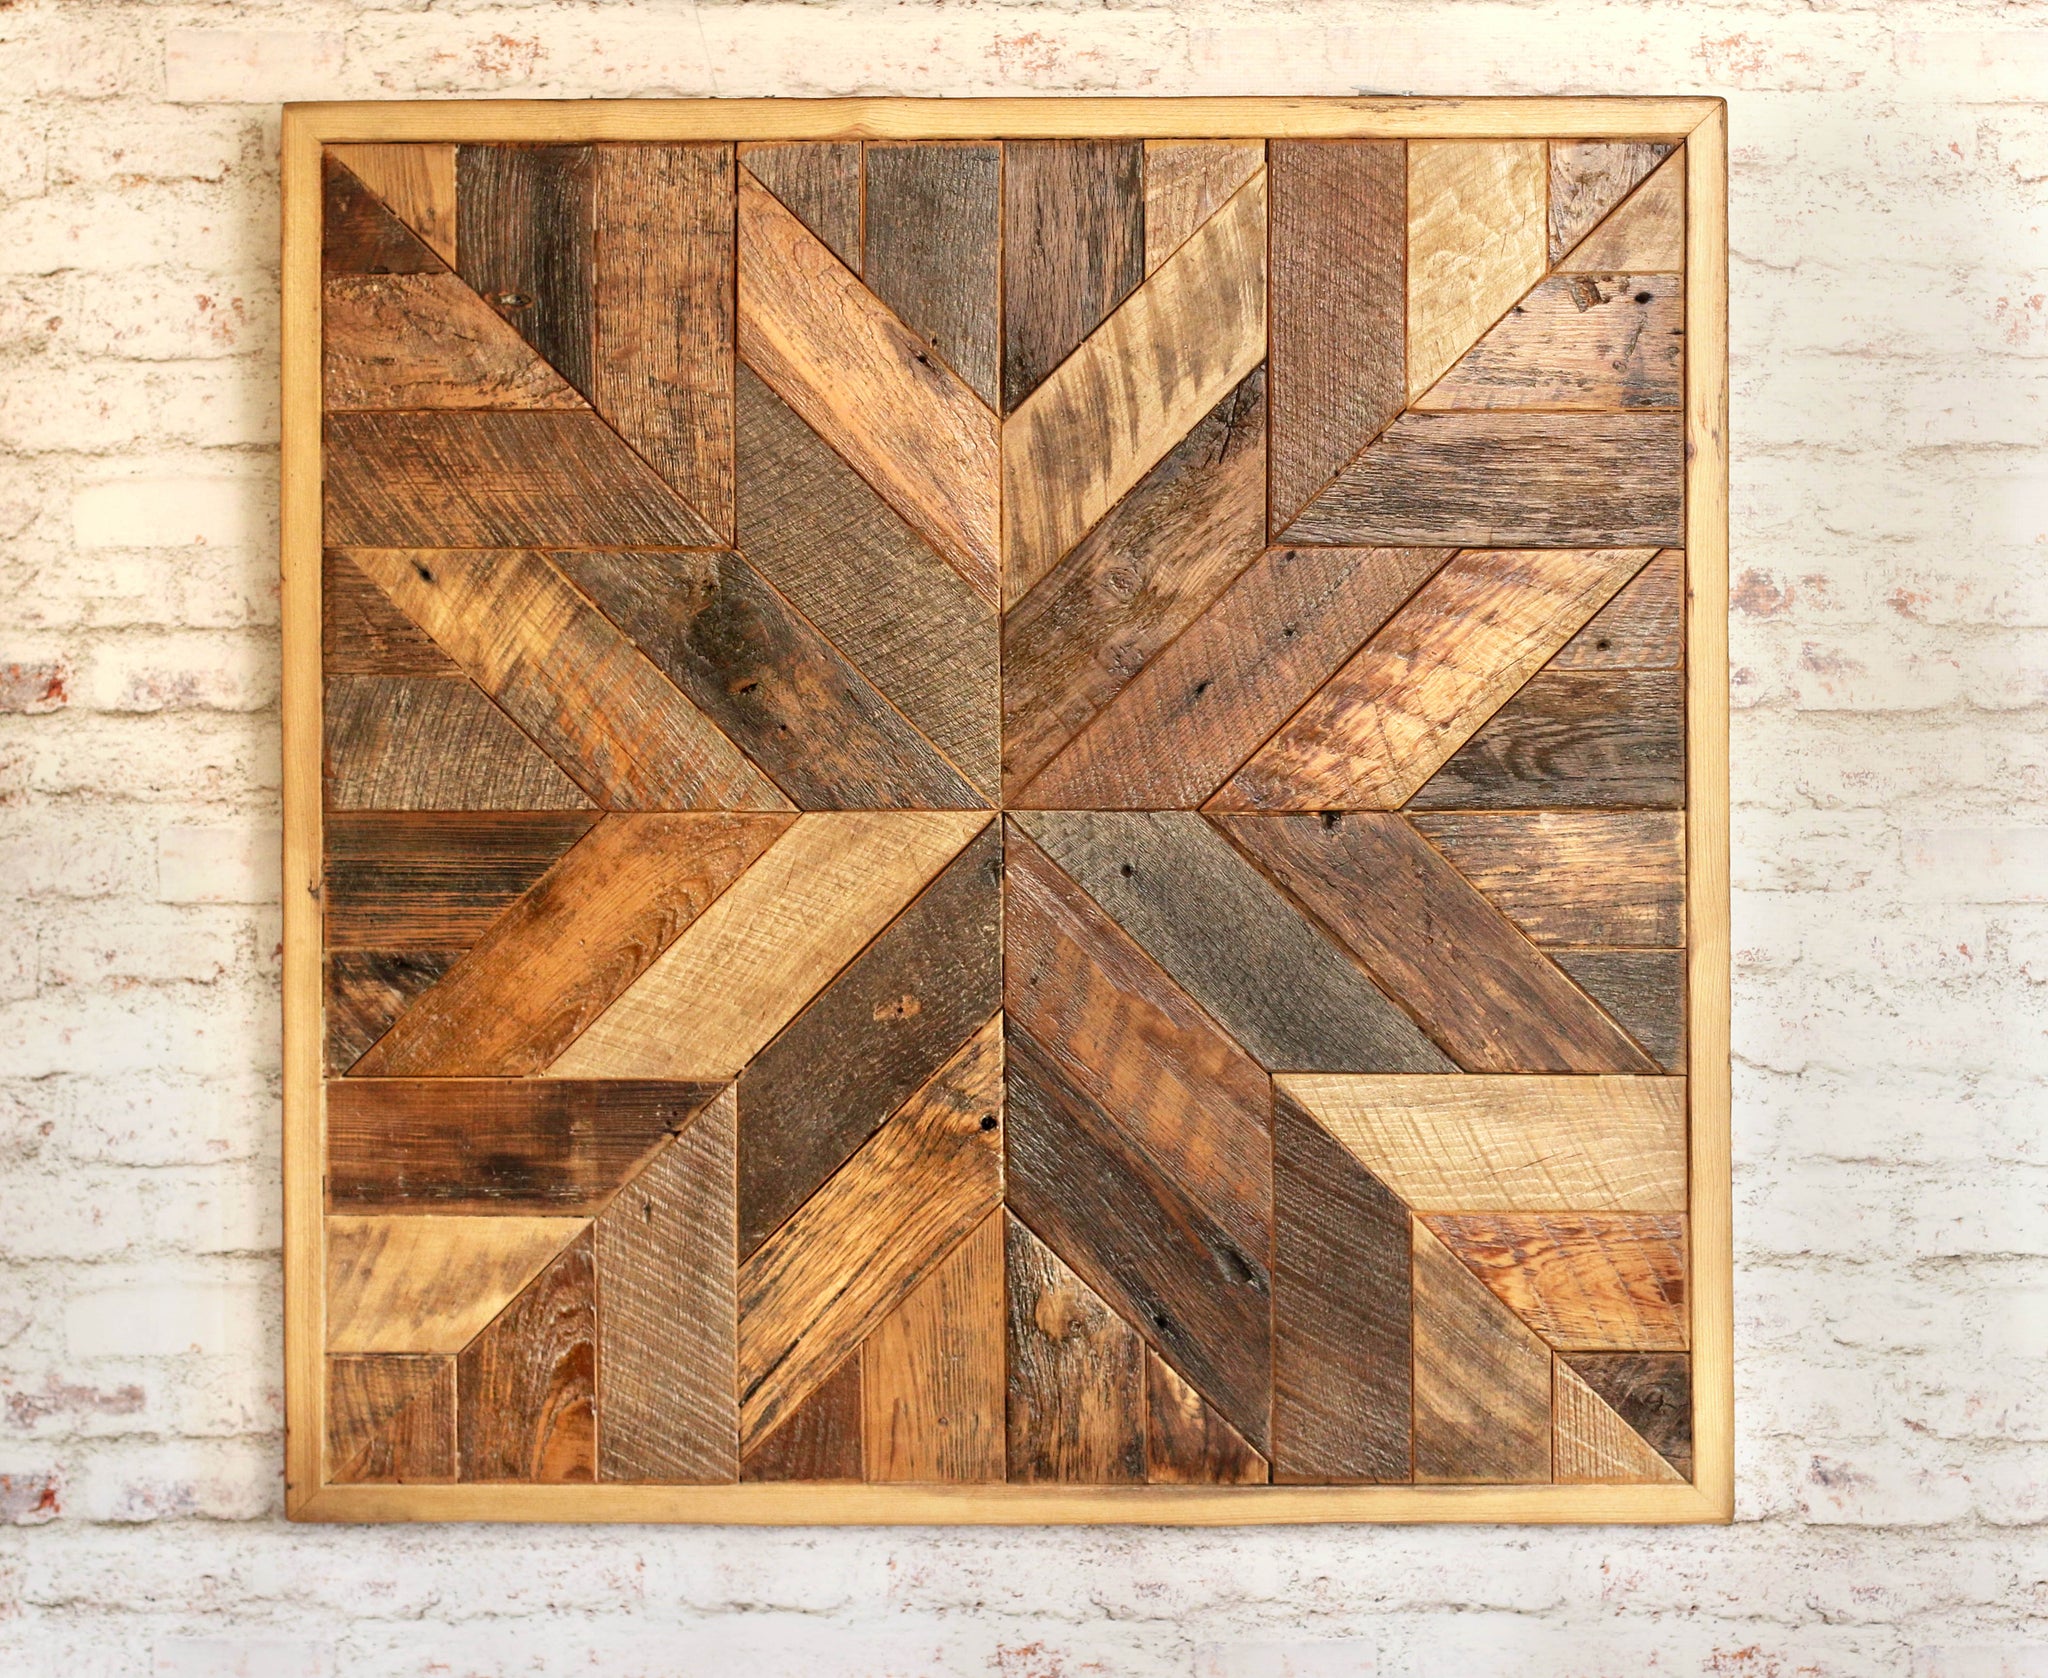 Woodworking wall art for sale Main Image